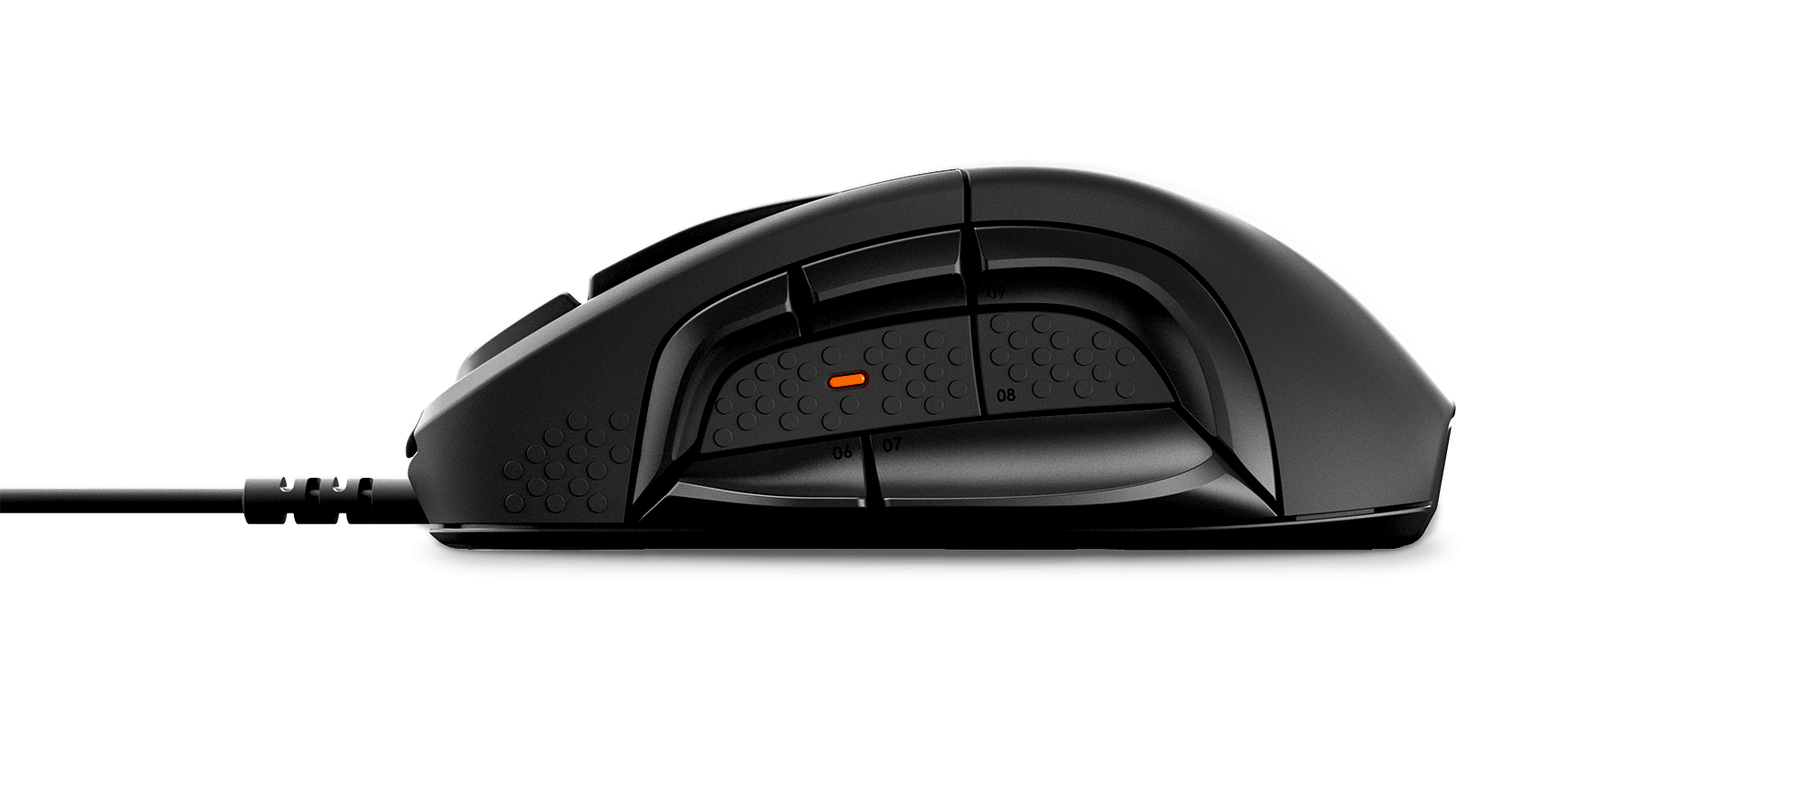 SteelSeries Rival 500 Gaming Mouse 62051 Next-gen Button Layout